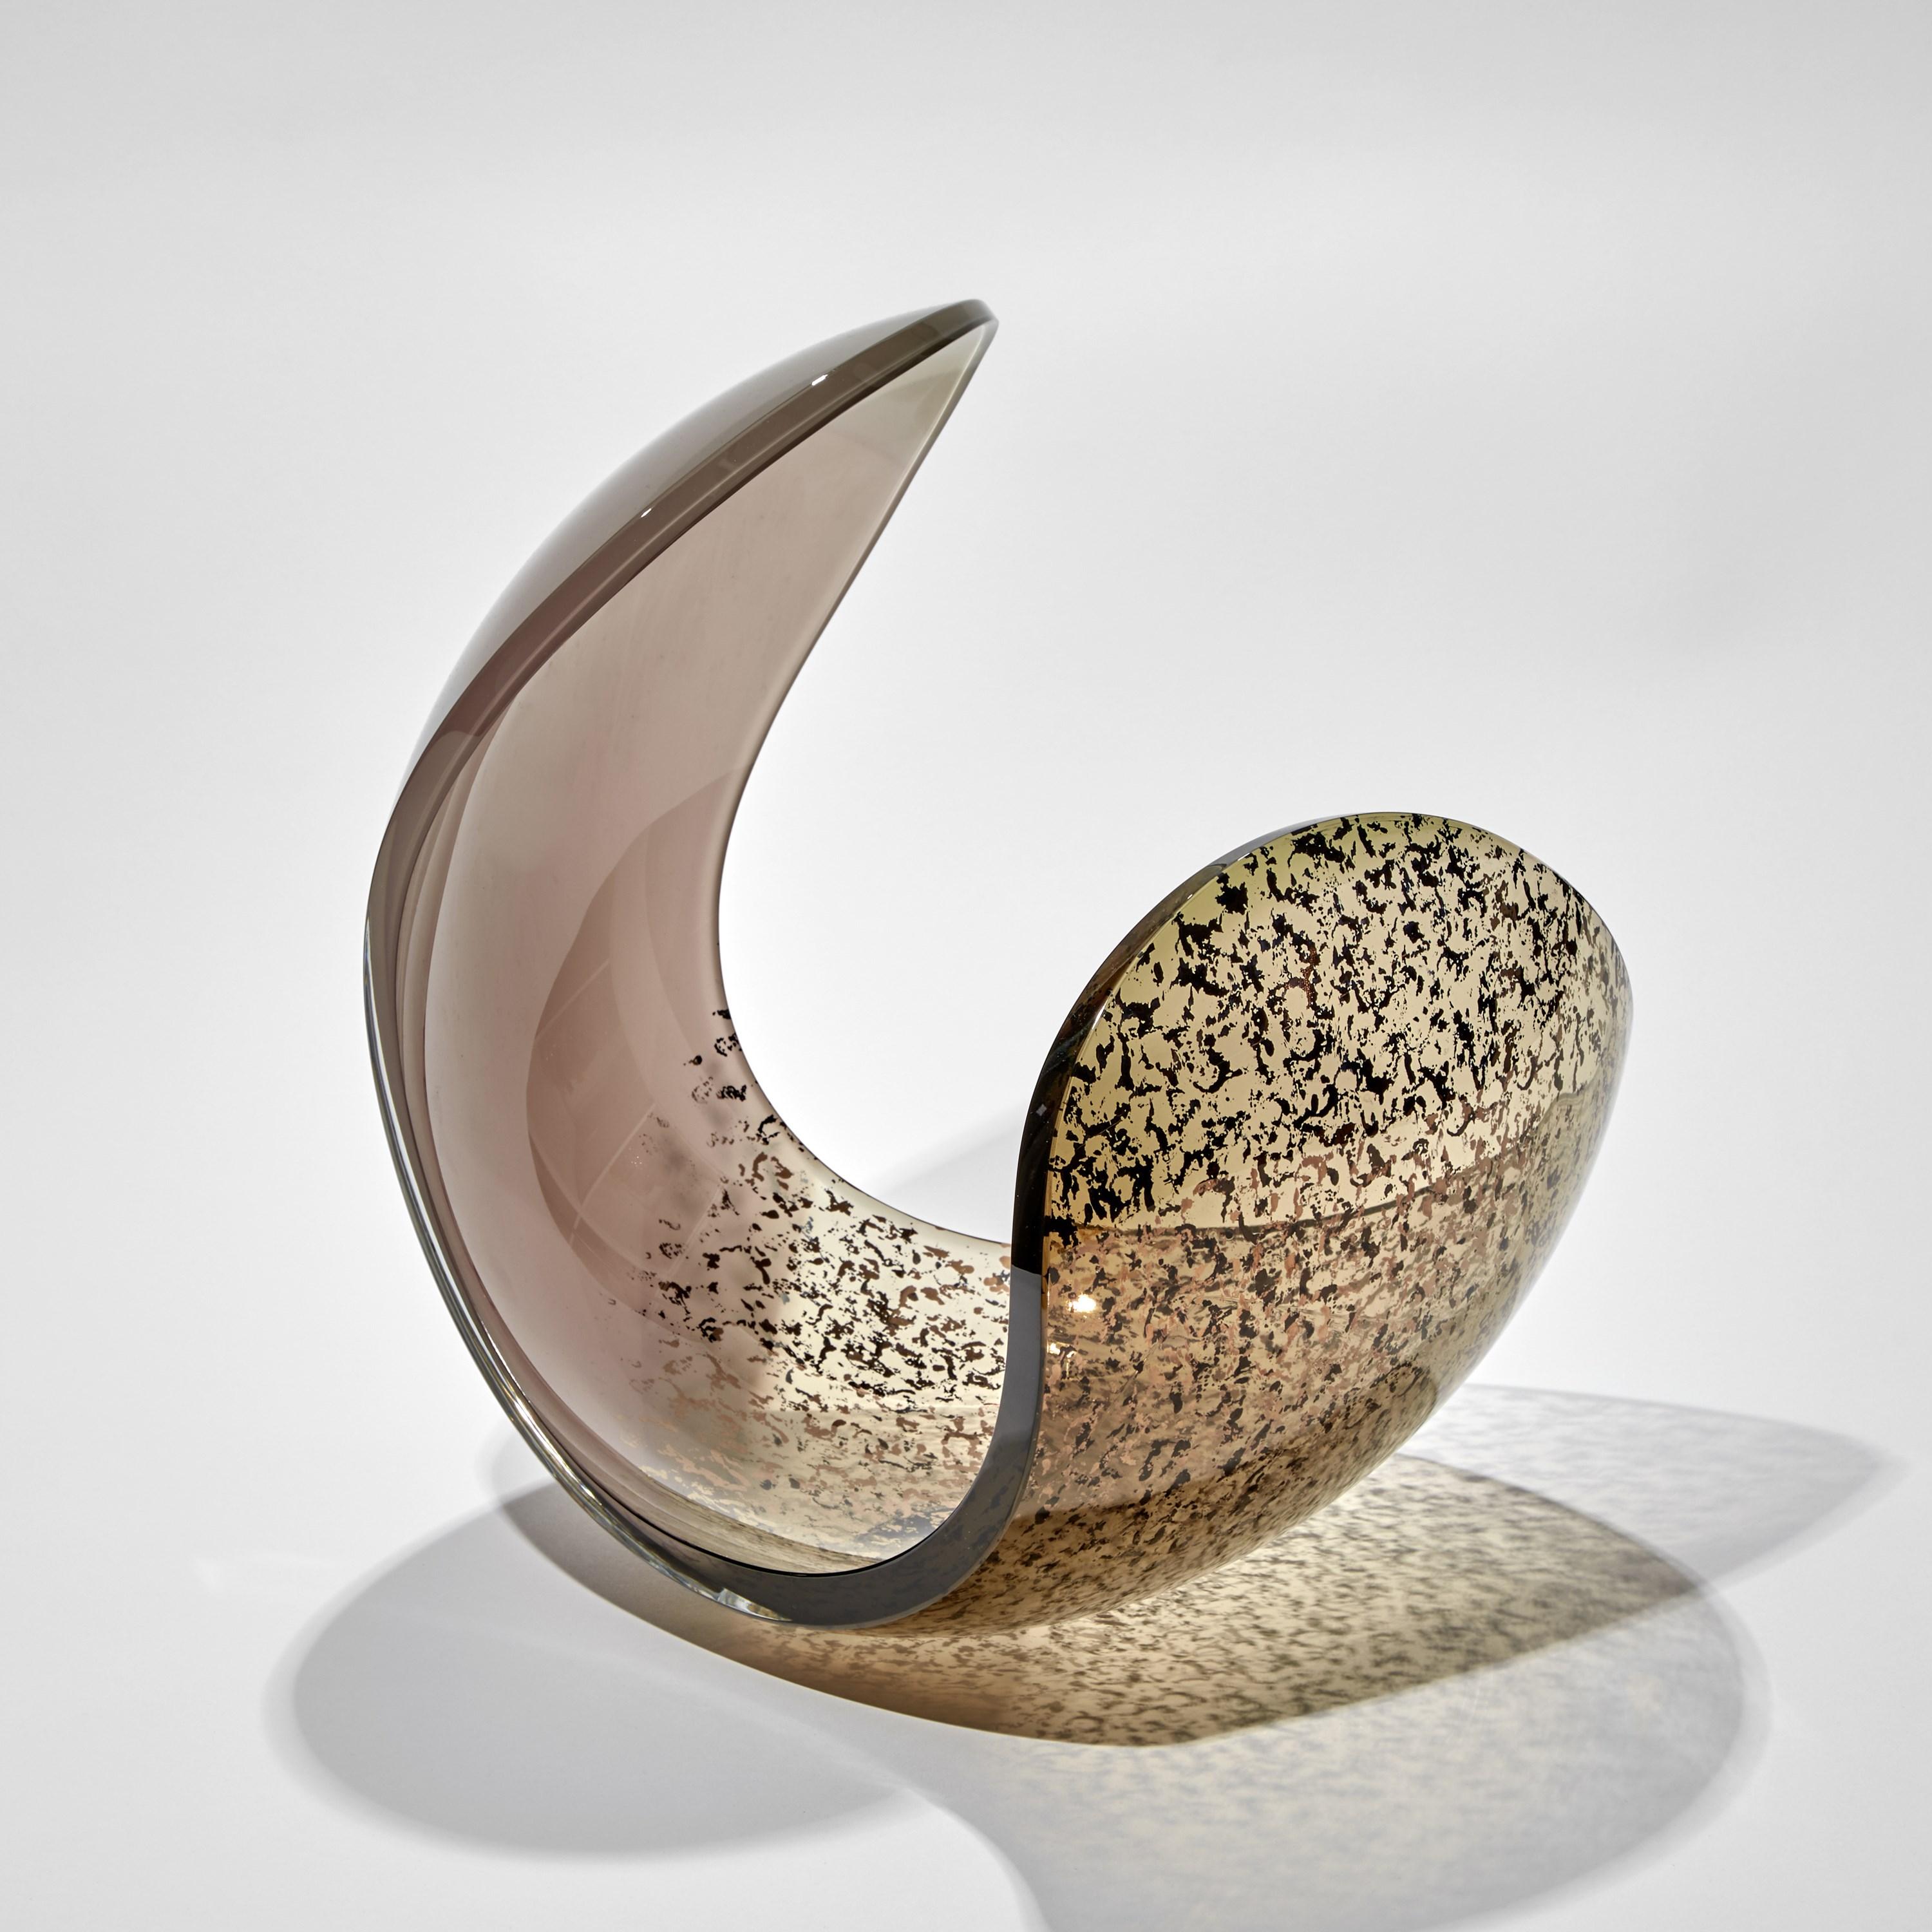 Swedish Planet in Pink, Brown & Gold, a Glass Sculpture & Centrepiece by Lena Bergström